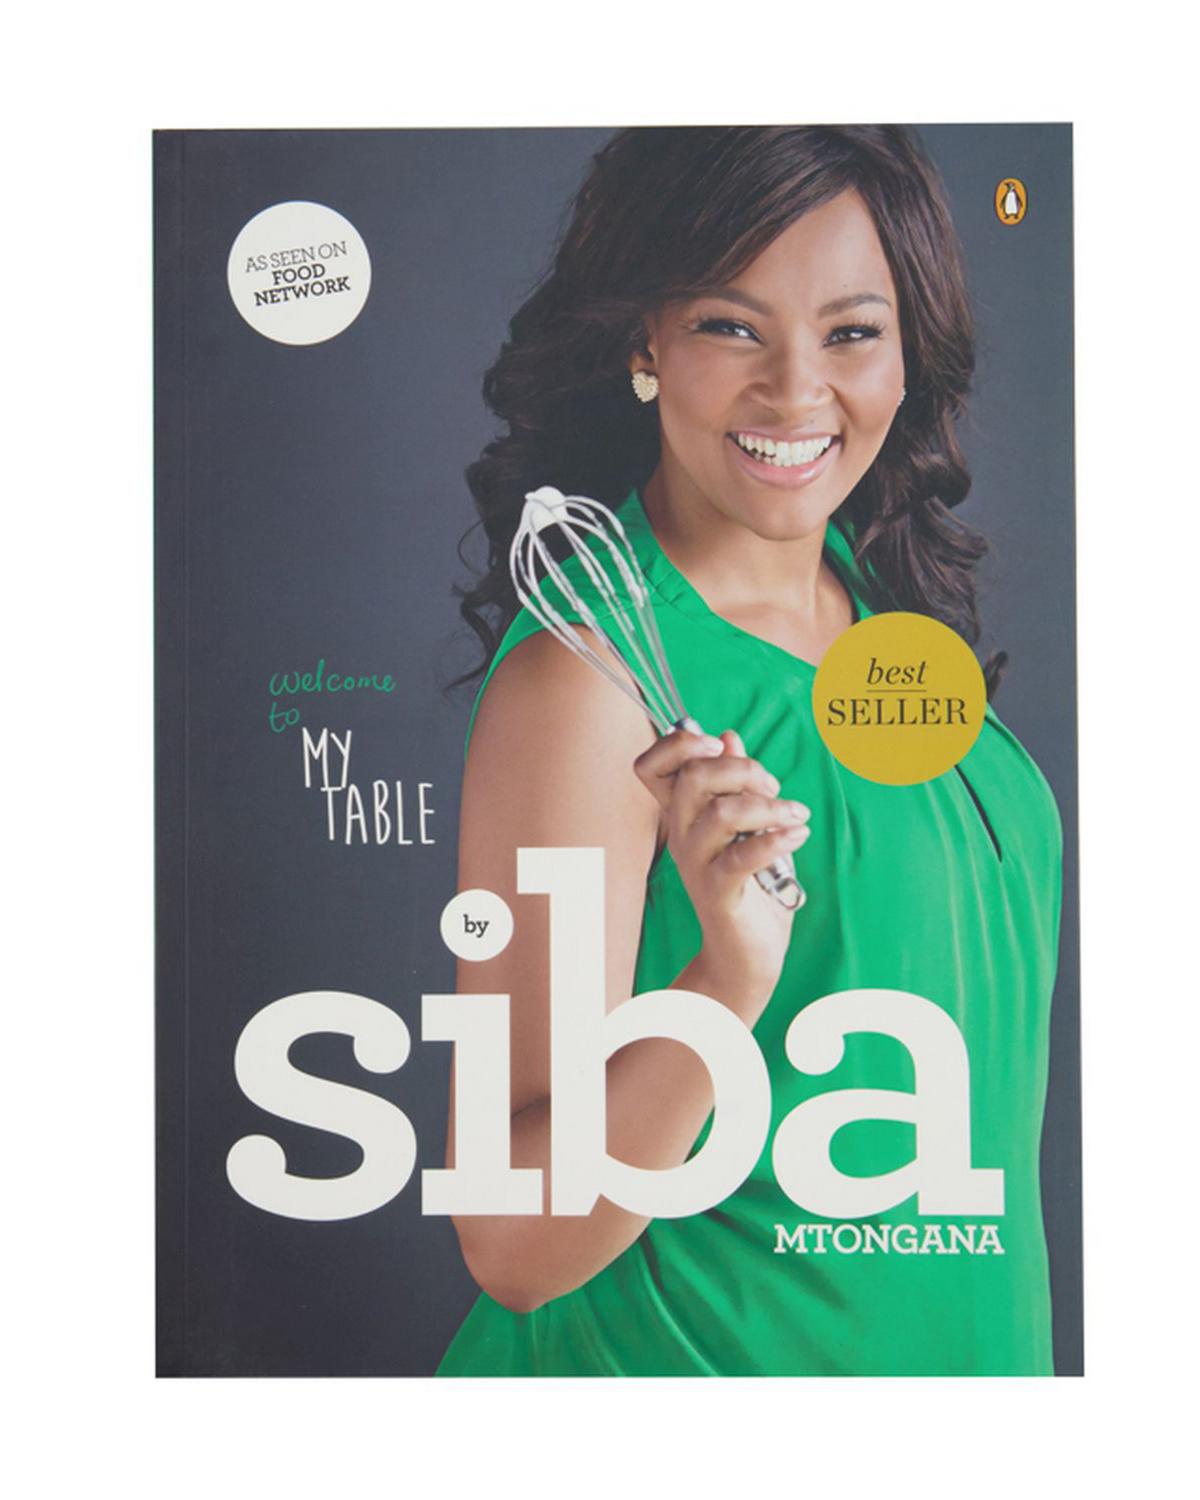 Welcome To My Table by Siba Mtongana -  Assorted